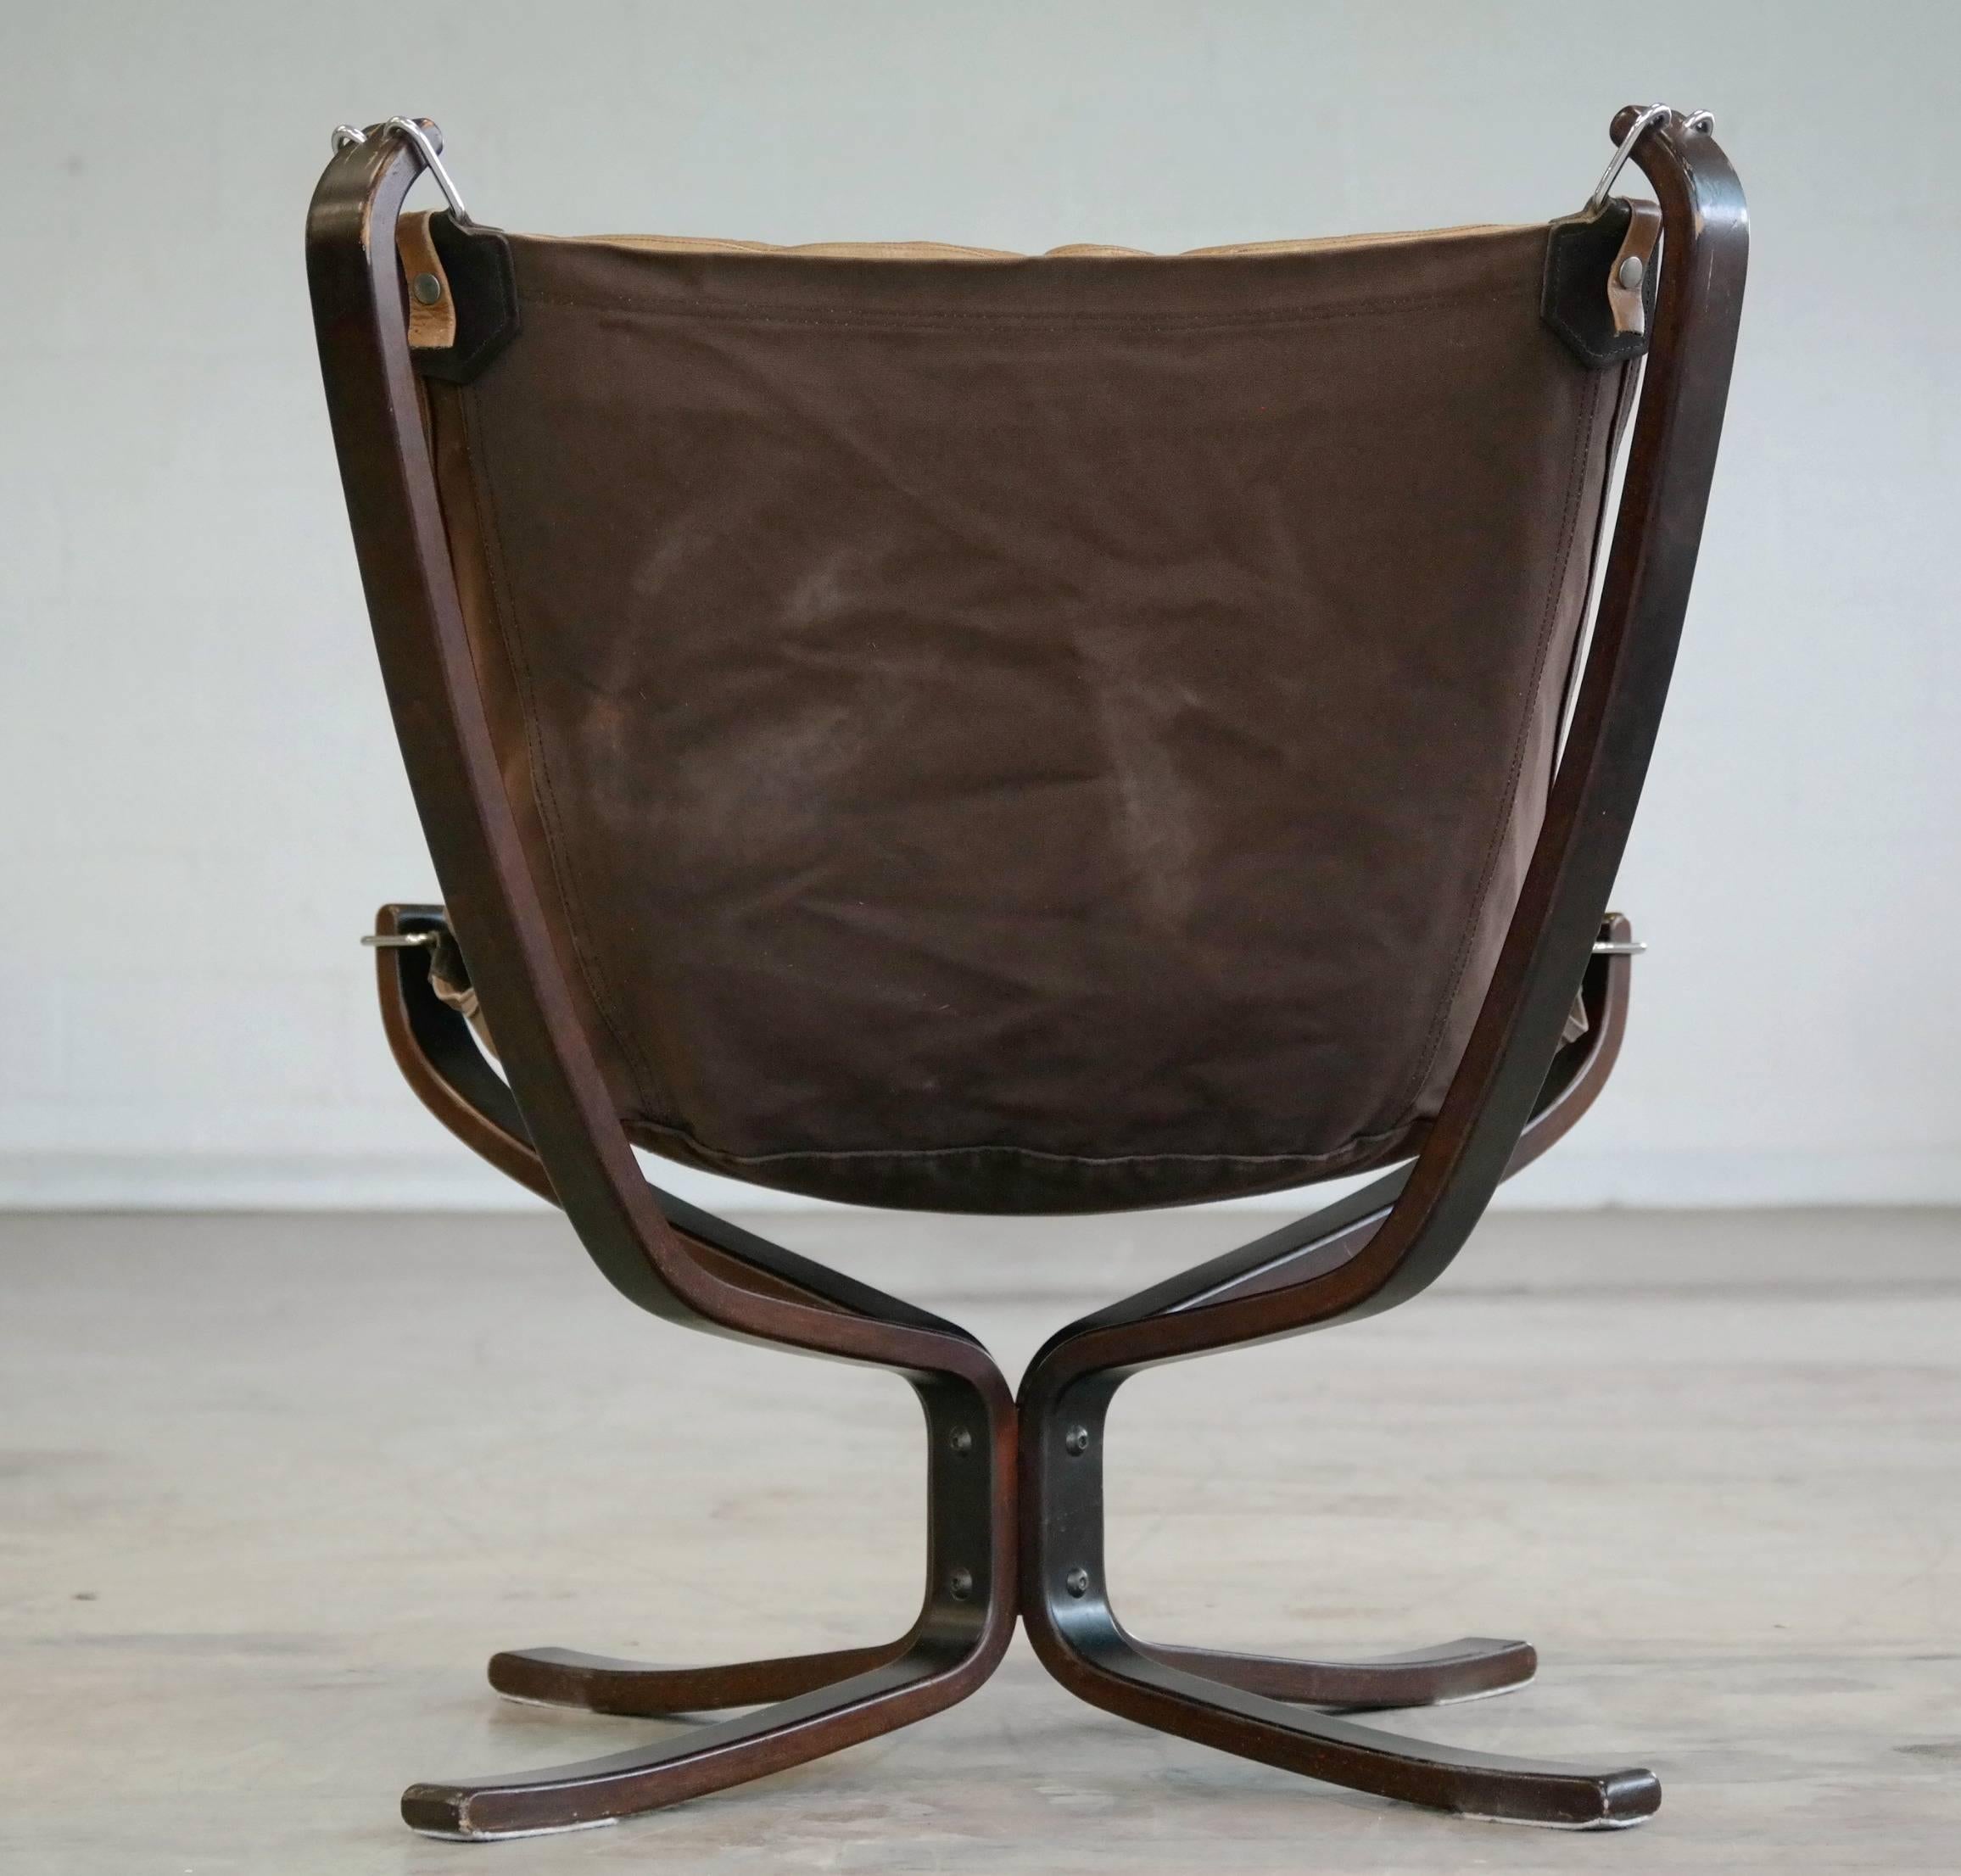 Norwegian Falcon Chair in Cognac Colored Leather by Sigurd Ressell for Vatne Mobler Norway